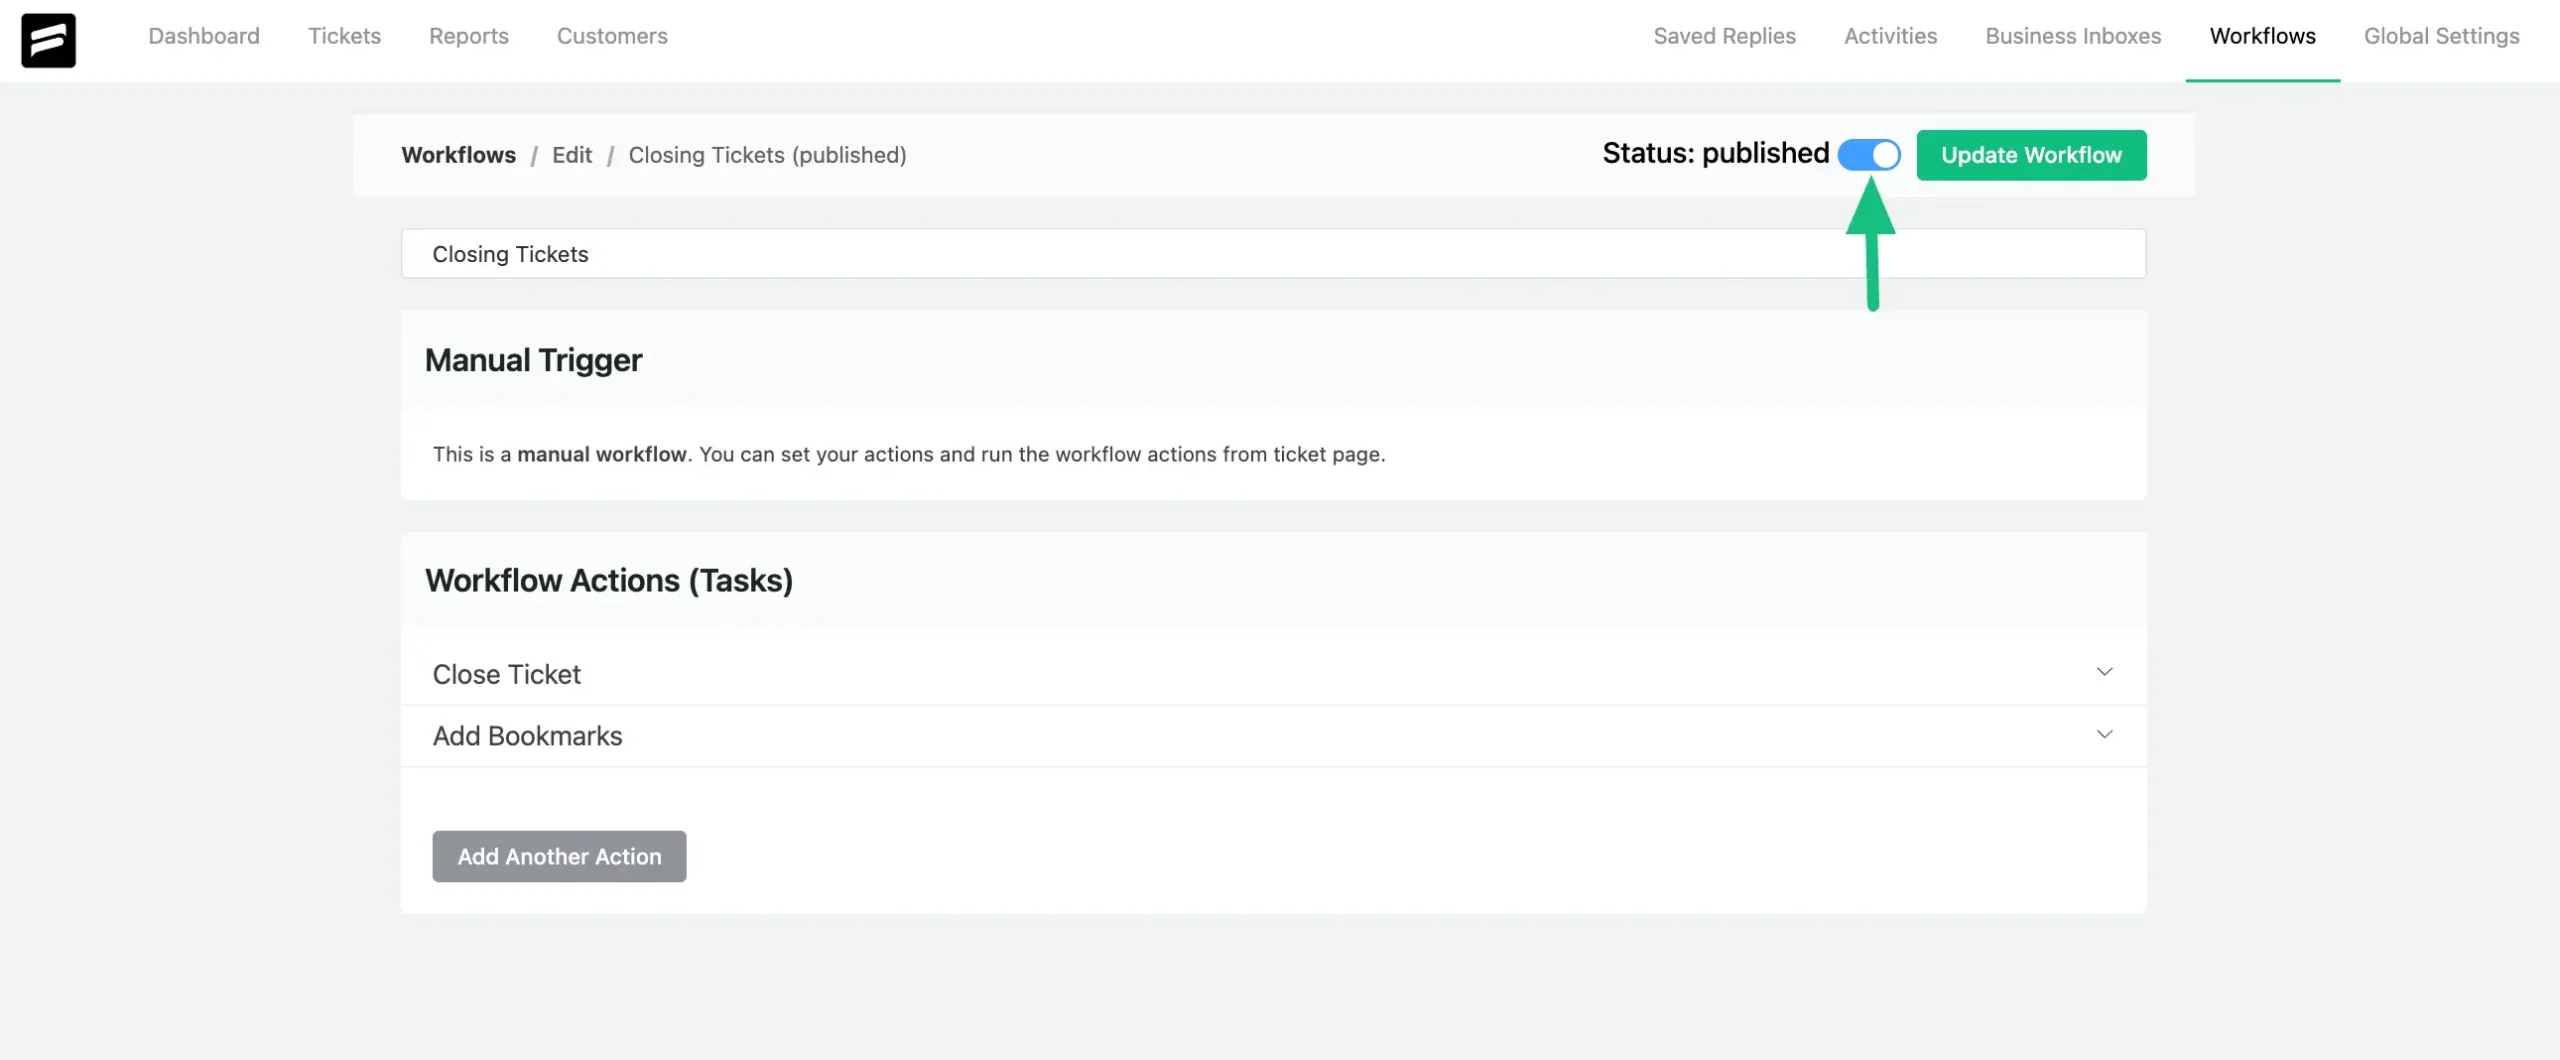 Publish the workflow